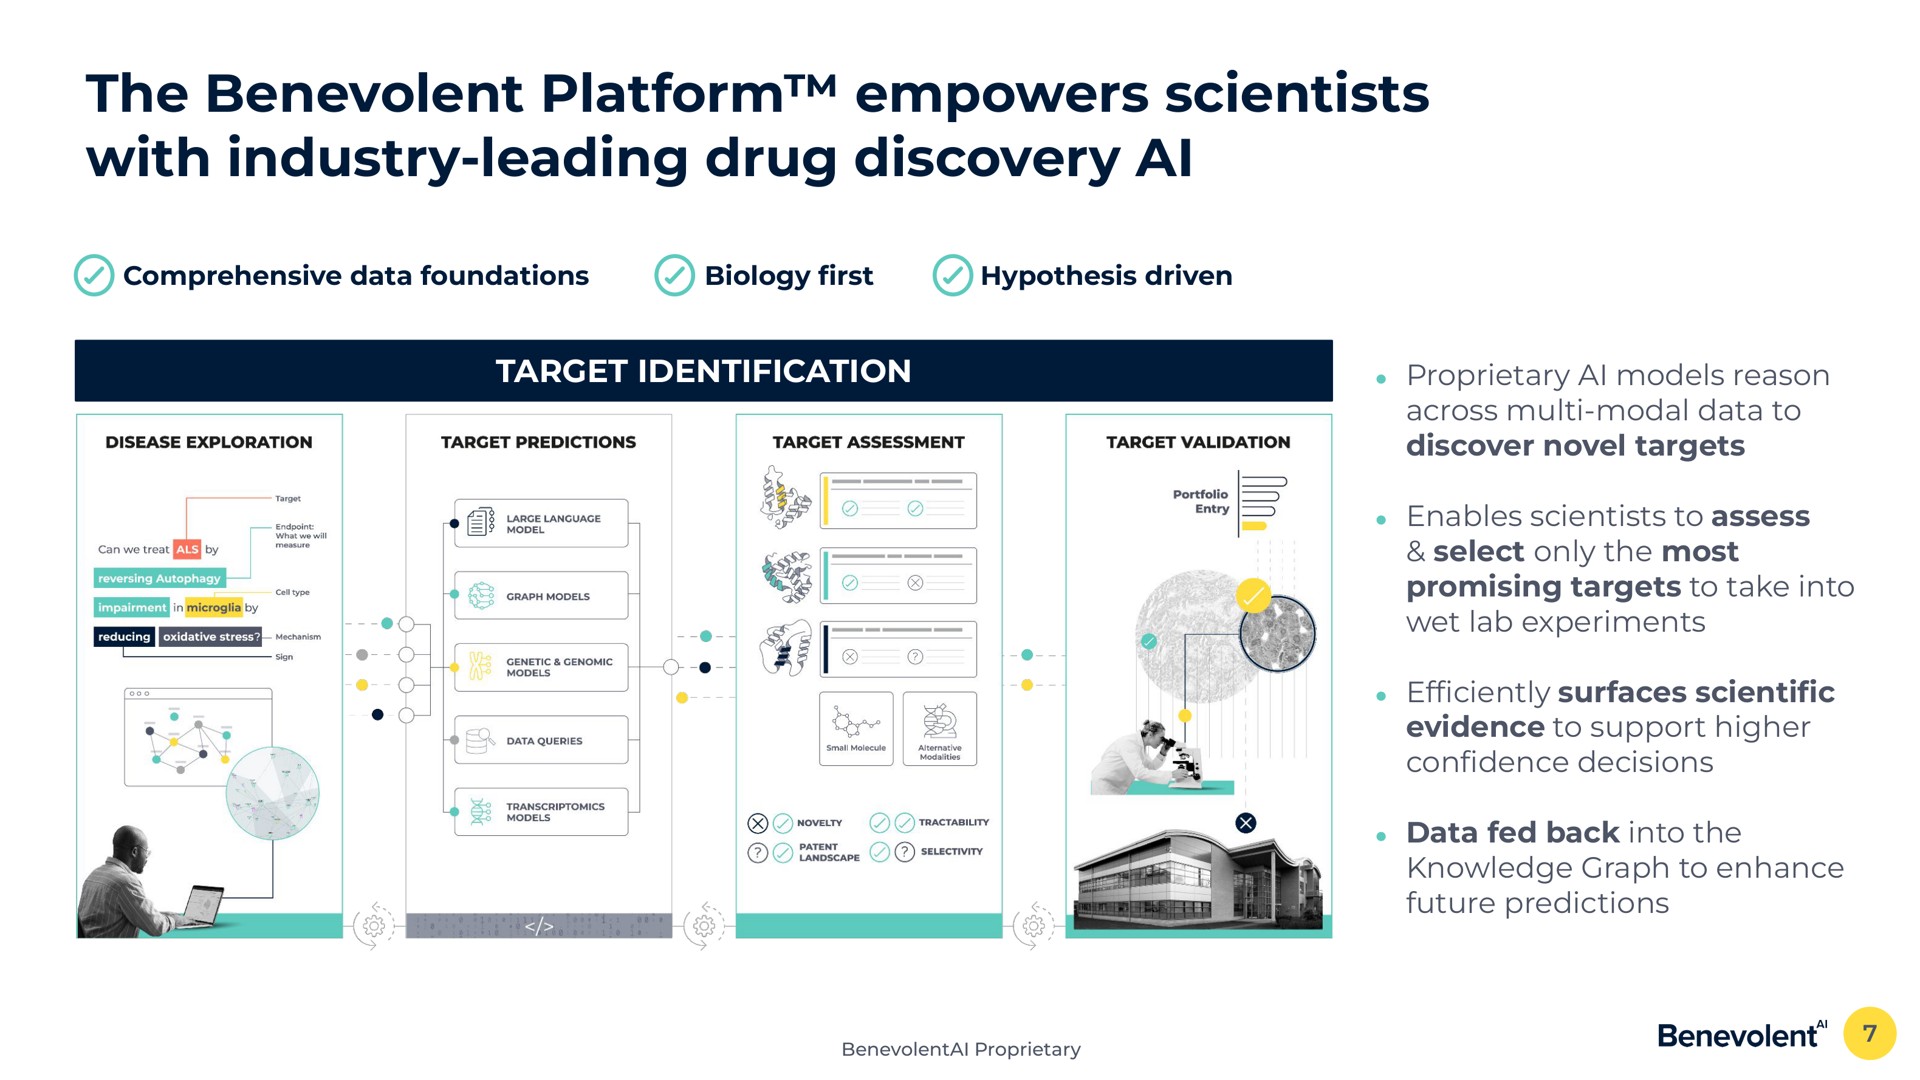 the benevolent platform empowers scientists with industry leading drug discovery comprehensive data foundations biology hypothesis driven target identification proprietary models reason across modal data to discover novel targets enables scientists to assess select only the most promising targets to take into wet lab experiments surfaces evidence to support higher con decisions data fed back into the knowledge graph to enhance future predictions | BenevolentAI